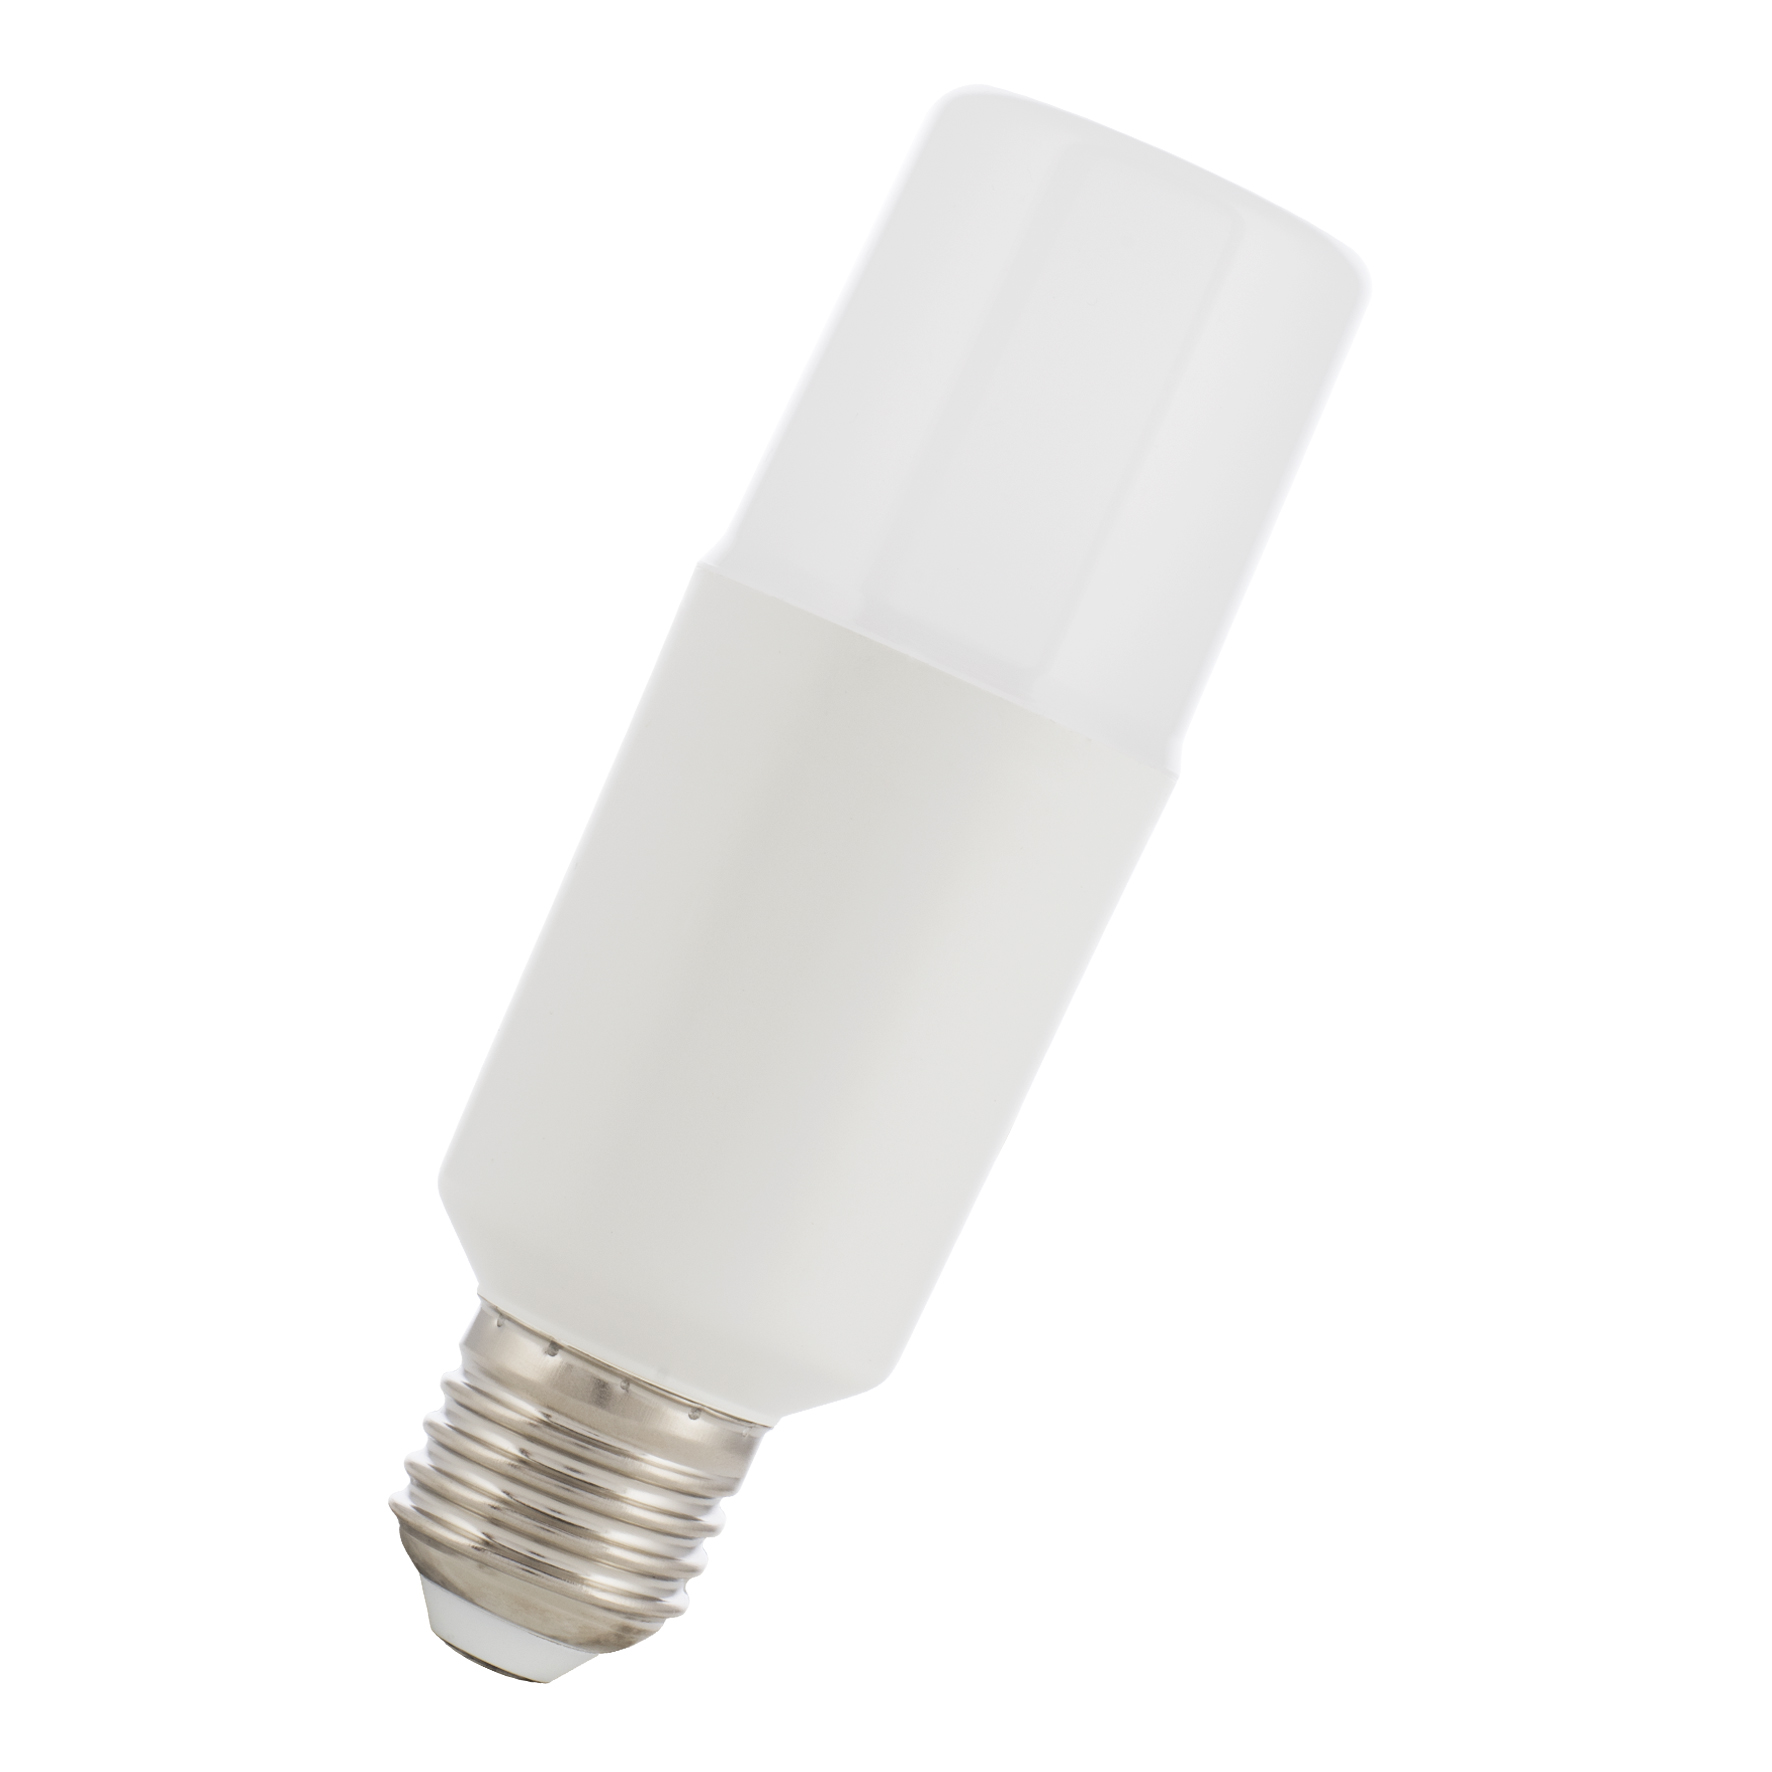 LED Ecobasic Compact T44 E27 11W (70W) 970lm 830